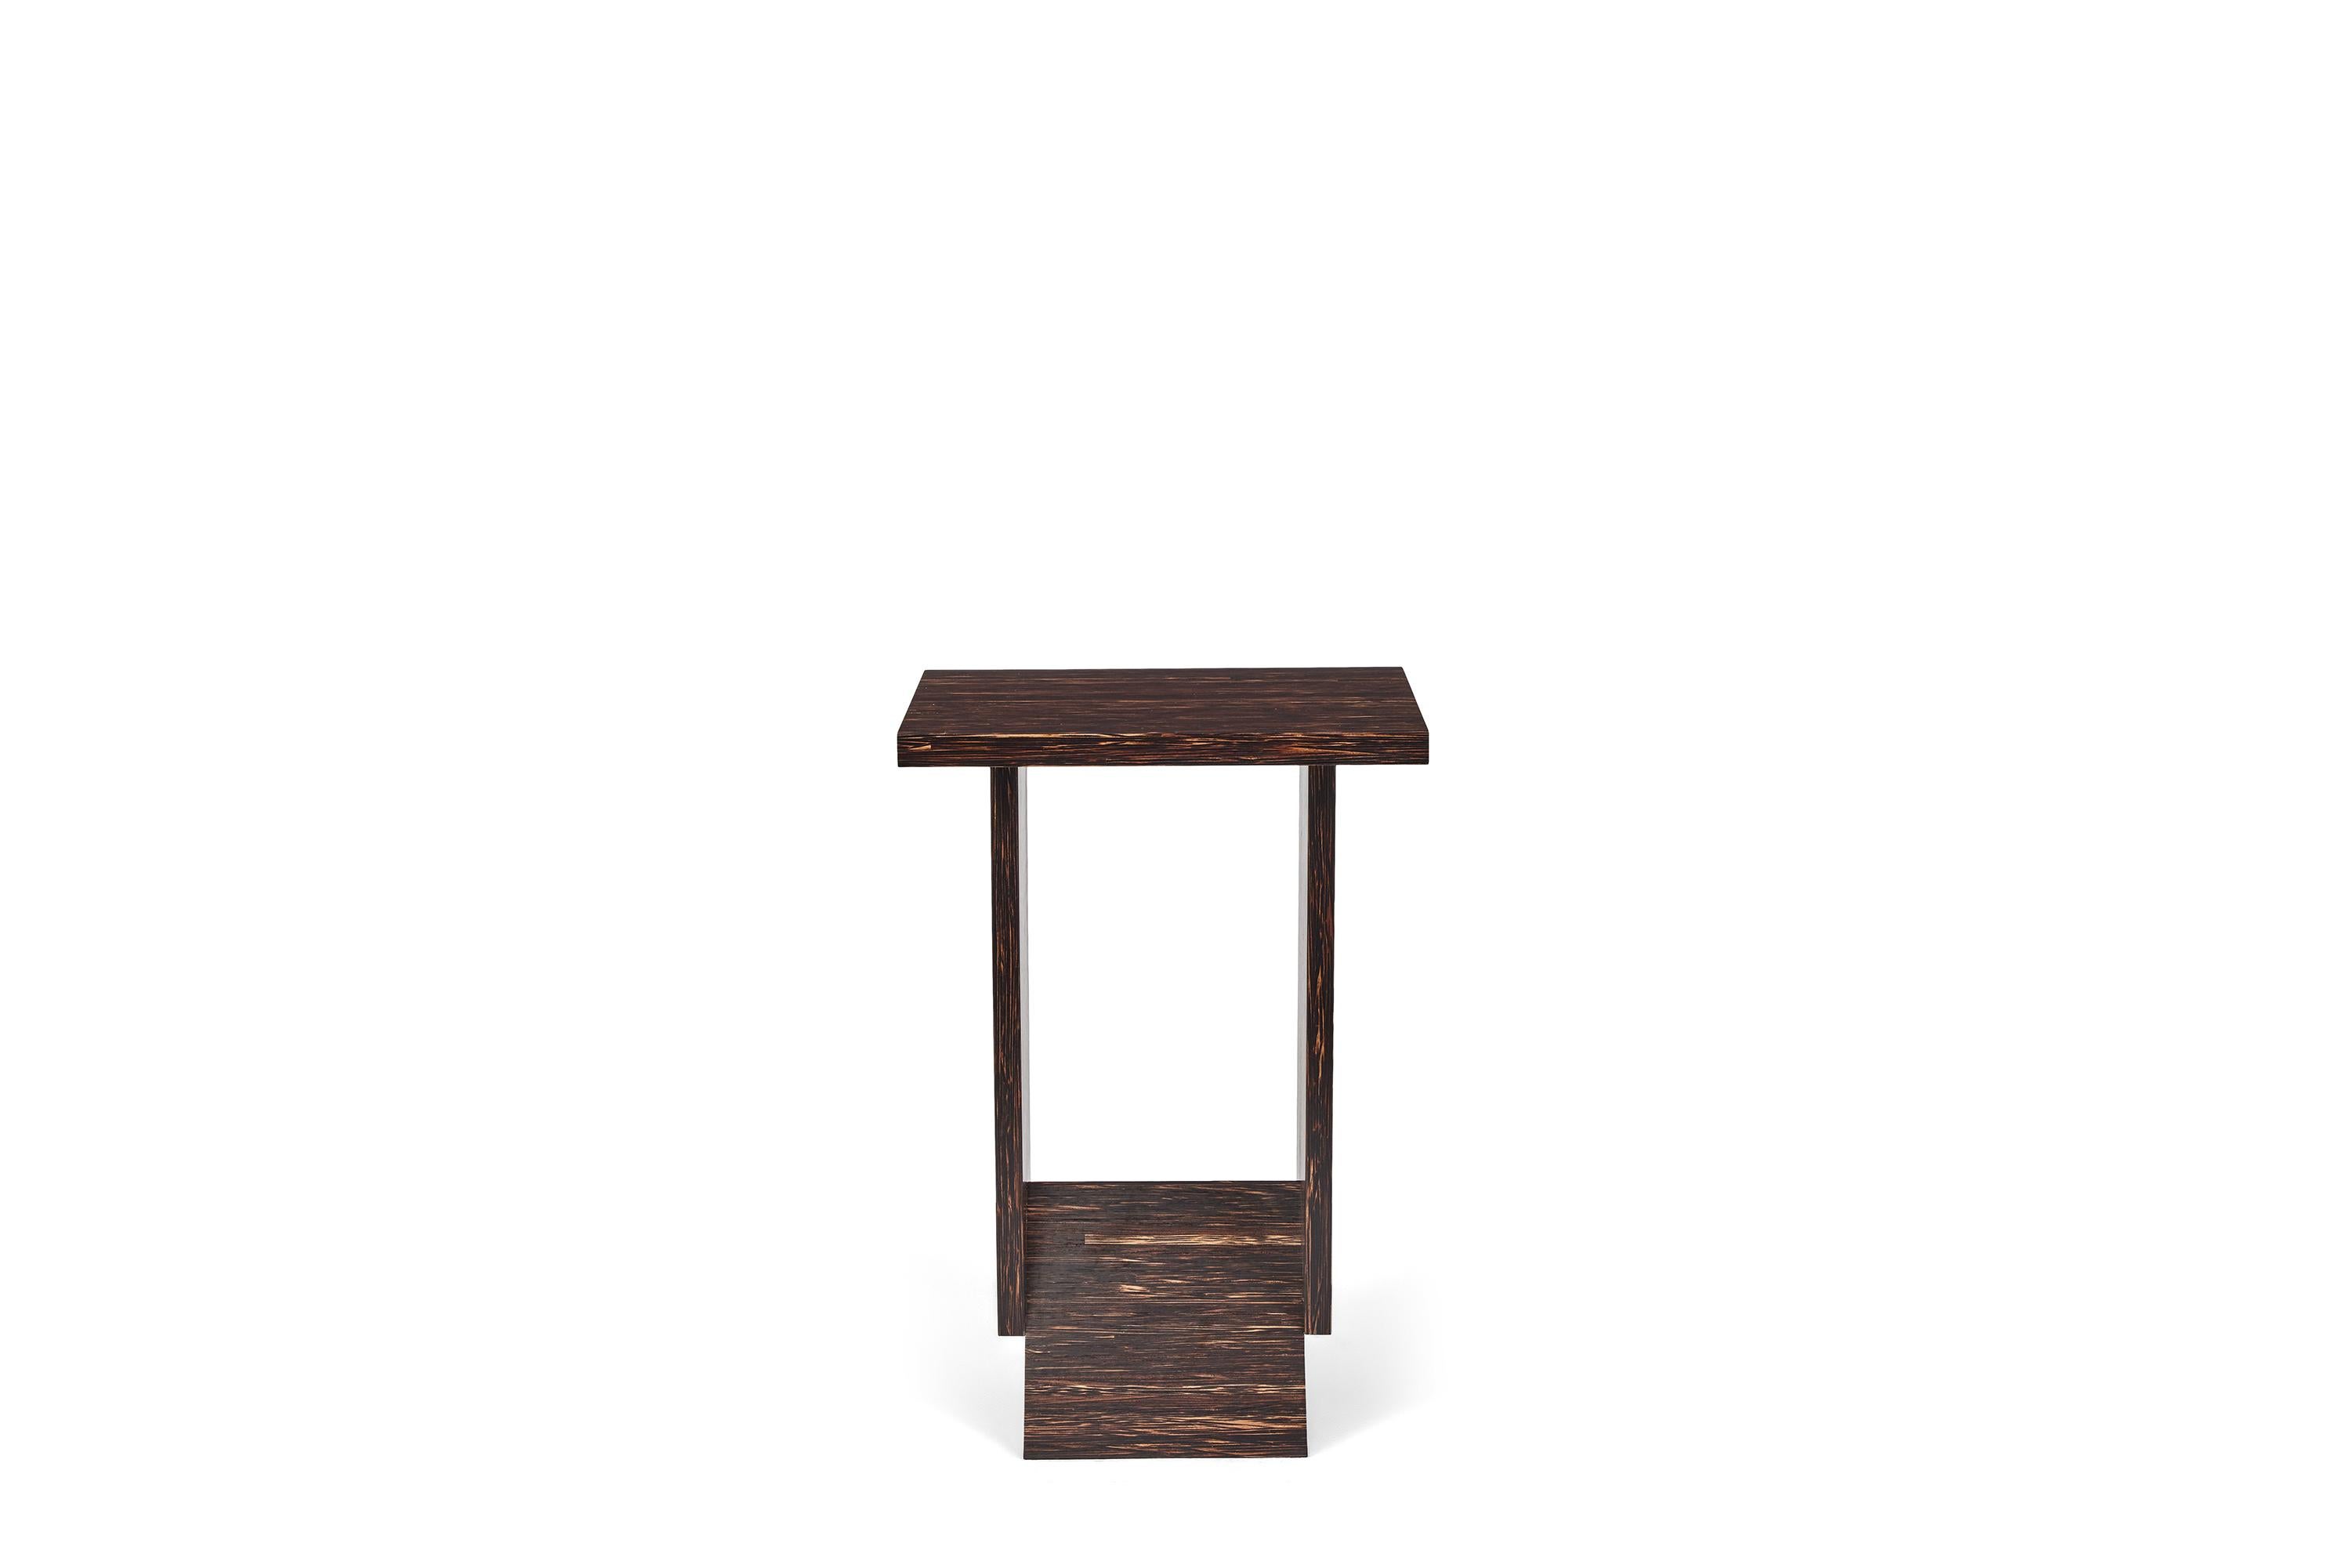 'Hotel de Tour' wooden side table in the Manner of Pierre Chareau.

Handcrafted in the Los Angeles and French workshops of noted French designer and antiques dealer Denis de le Mesiere, who meticulously pays homage to the work of Pierre Chareau